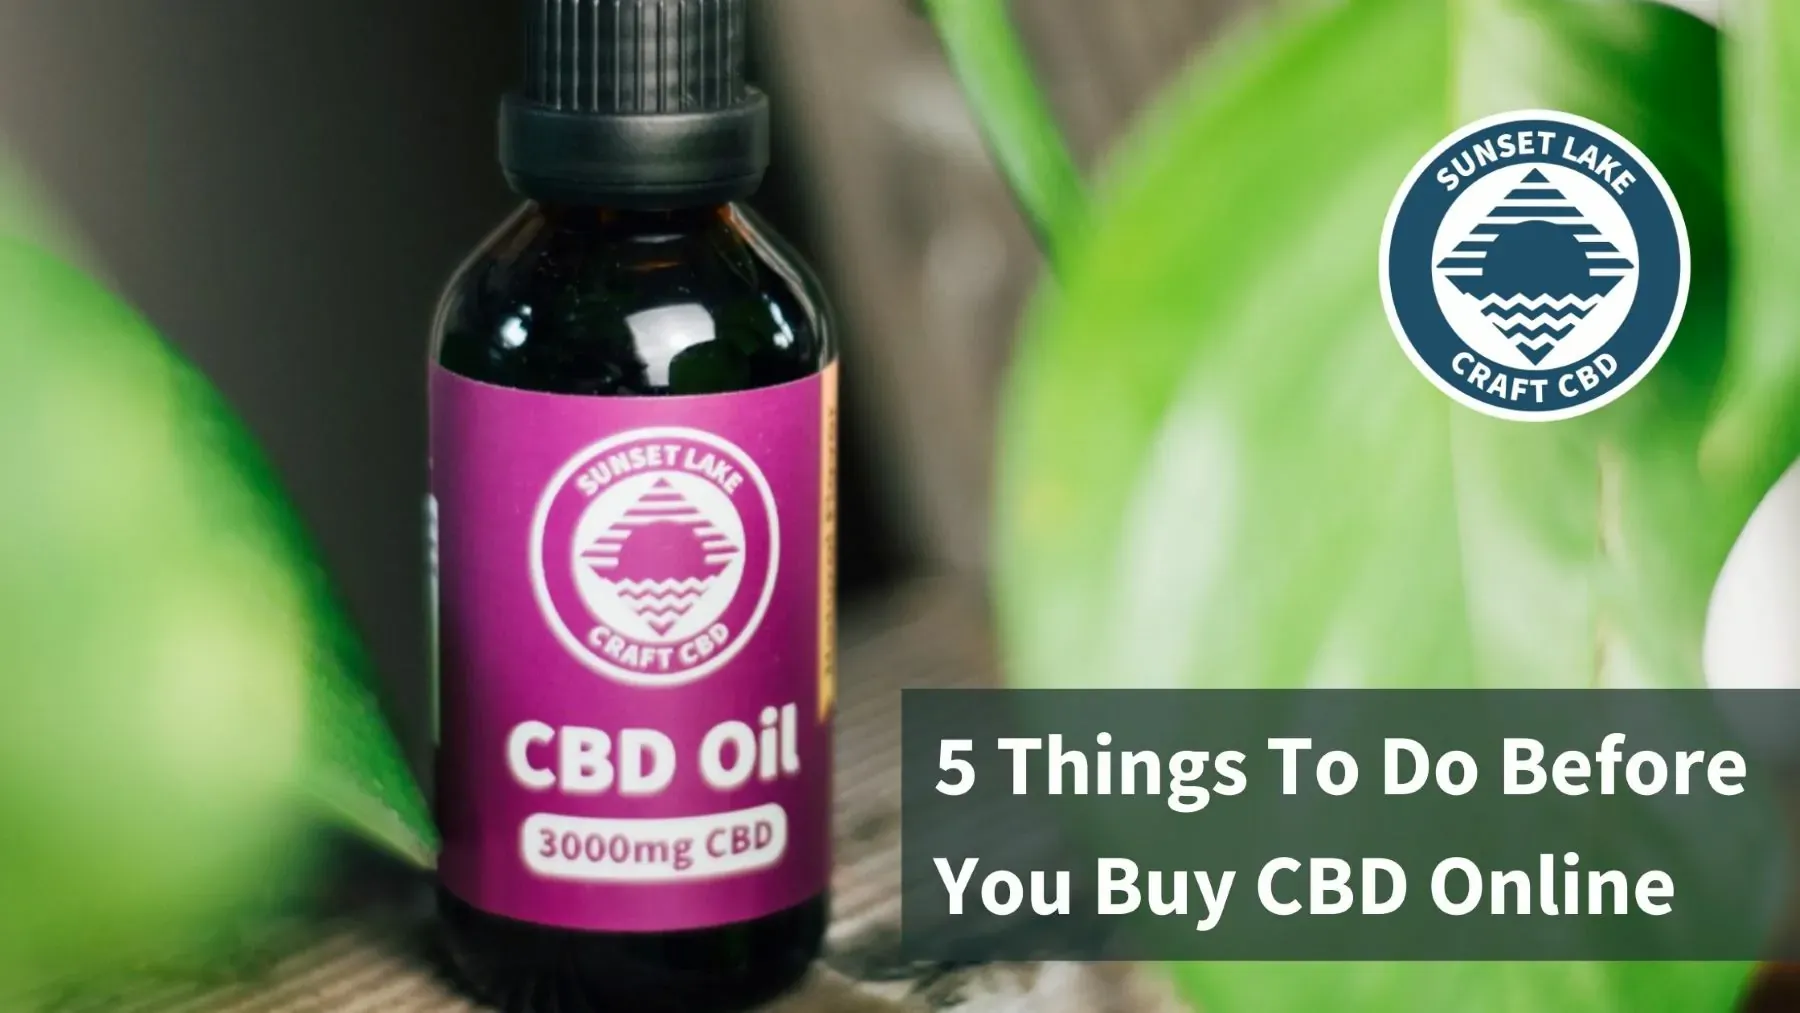 A bottle of CBD oil. Text that reads "5 Things to do before you buy CBD online"